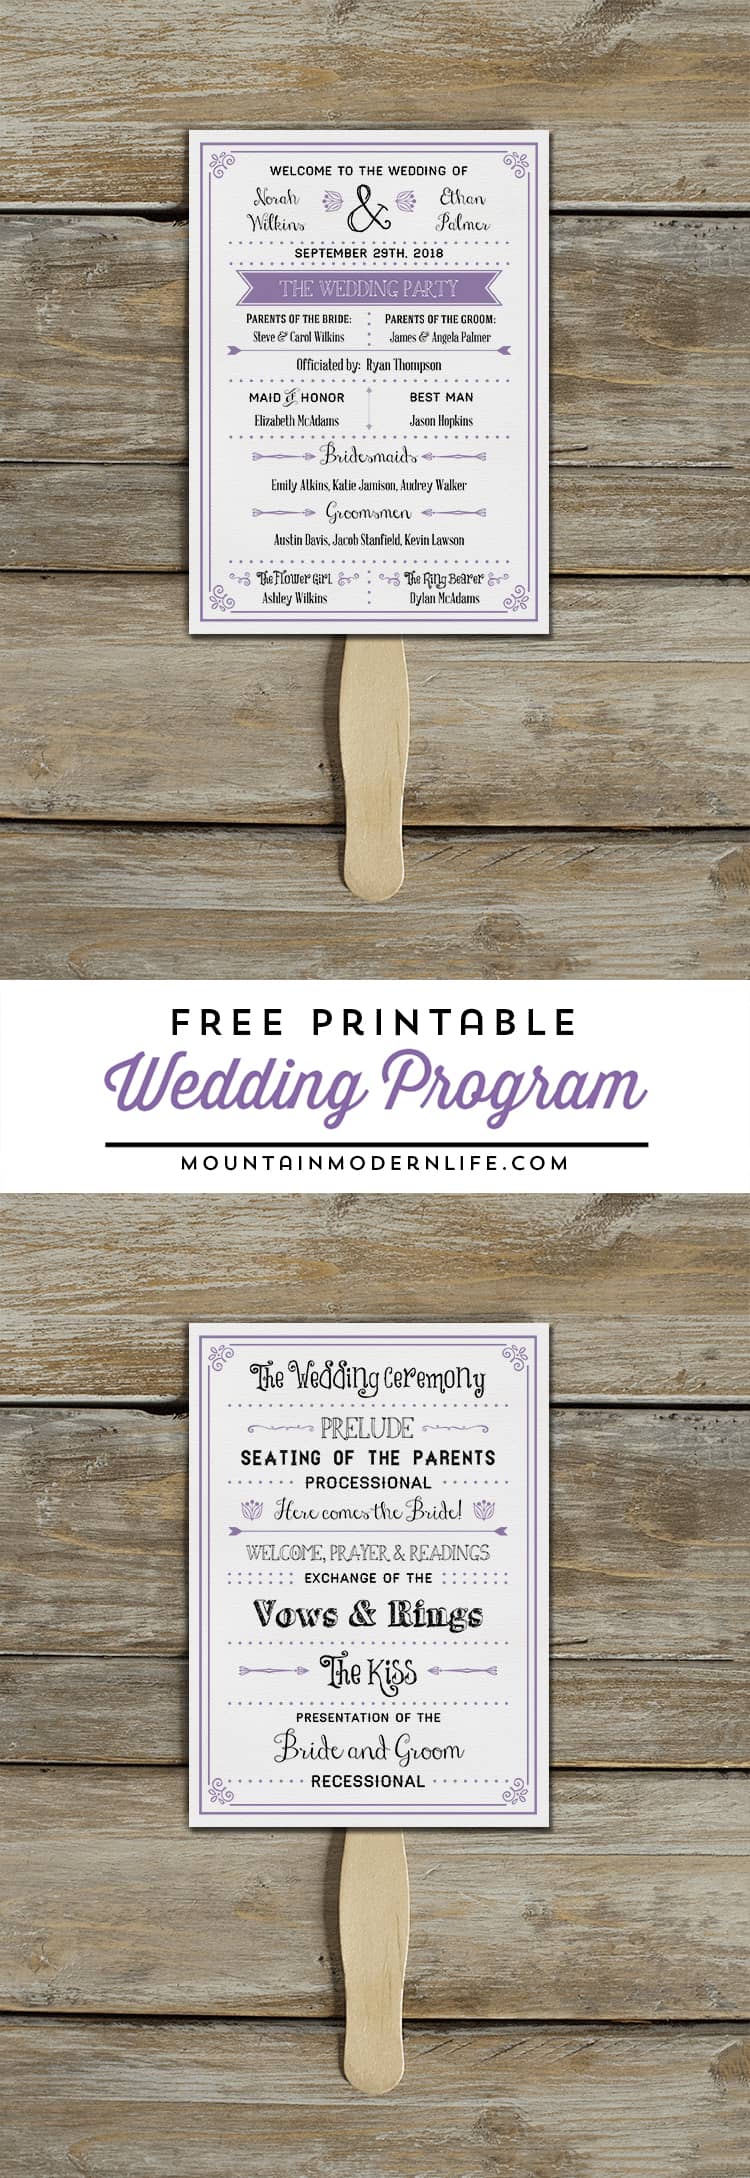 Planning a rustic or vintage-inspired wedding? Download this FREE Printable Wedding Program that doubles as a fan! MountainModernLife.com